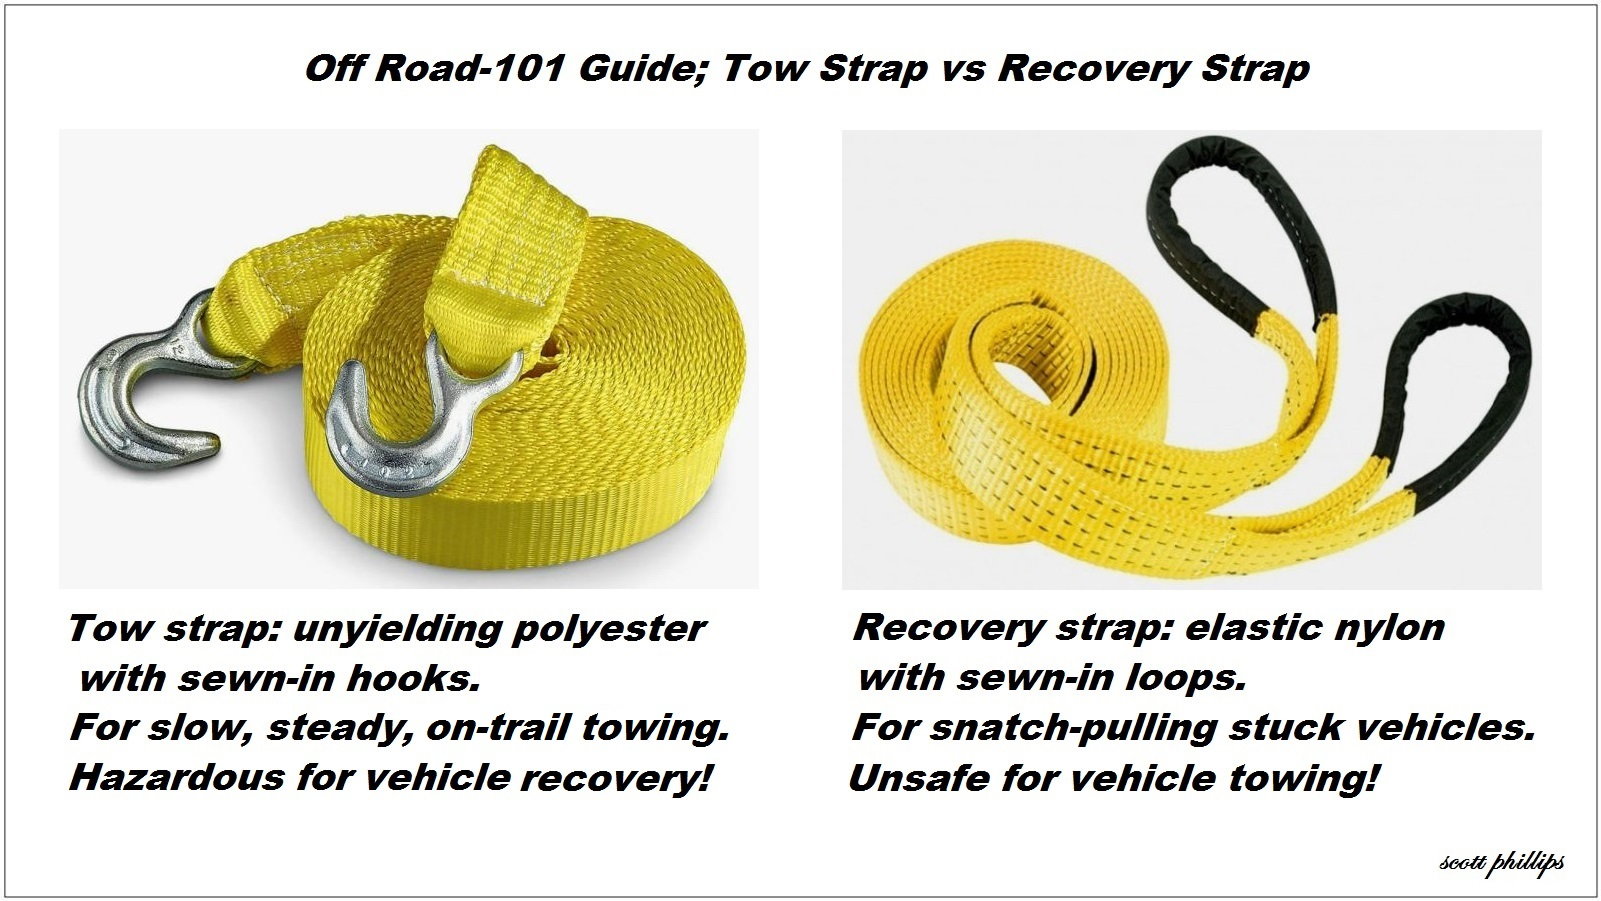 Tow strap vs recovery strap